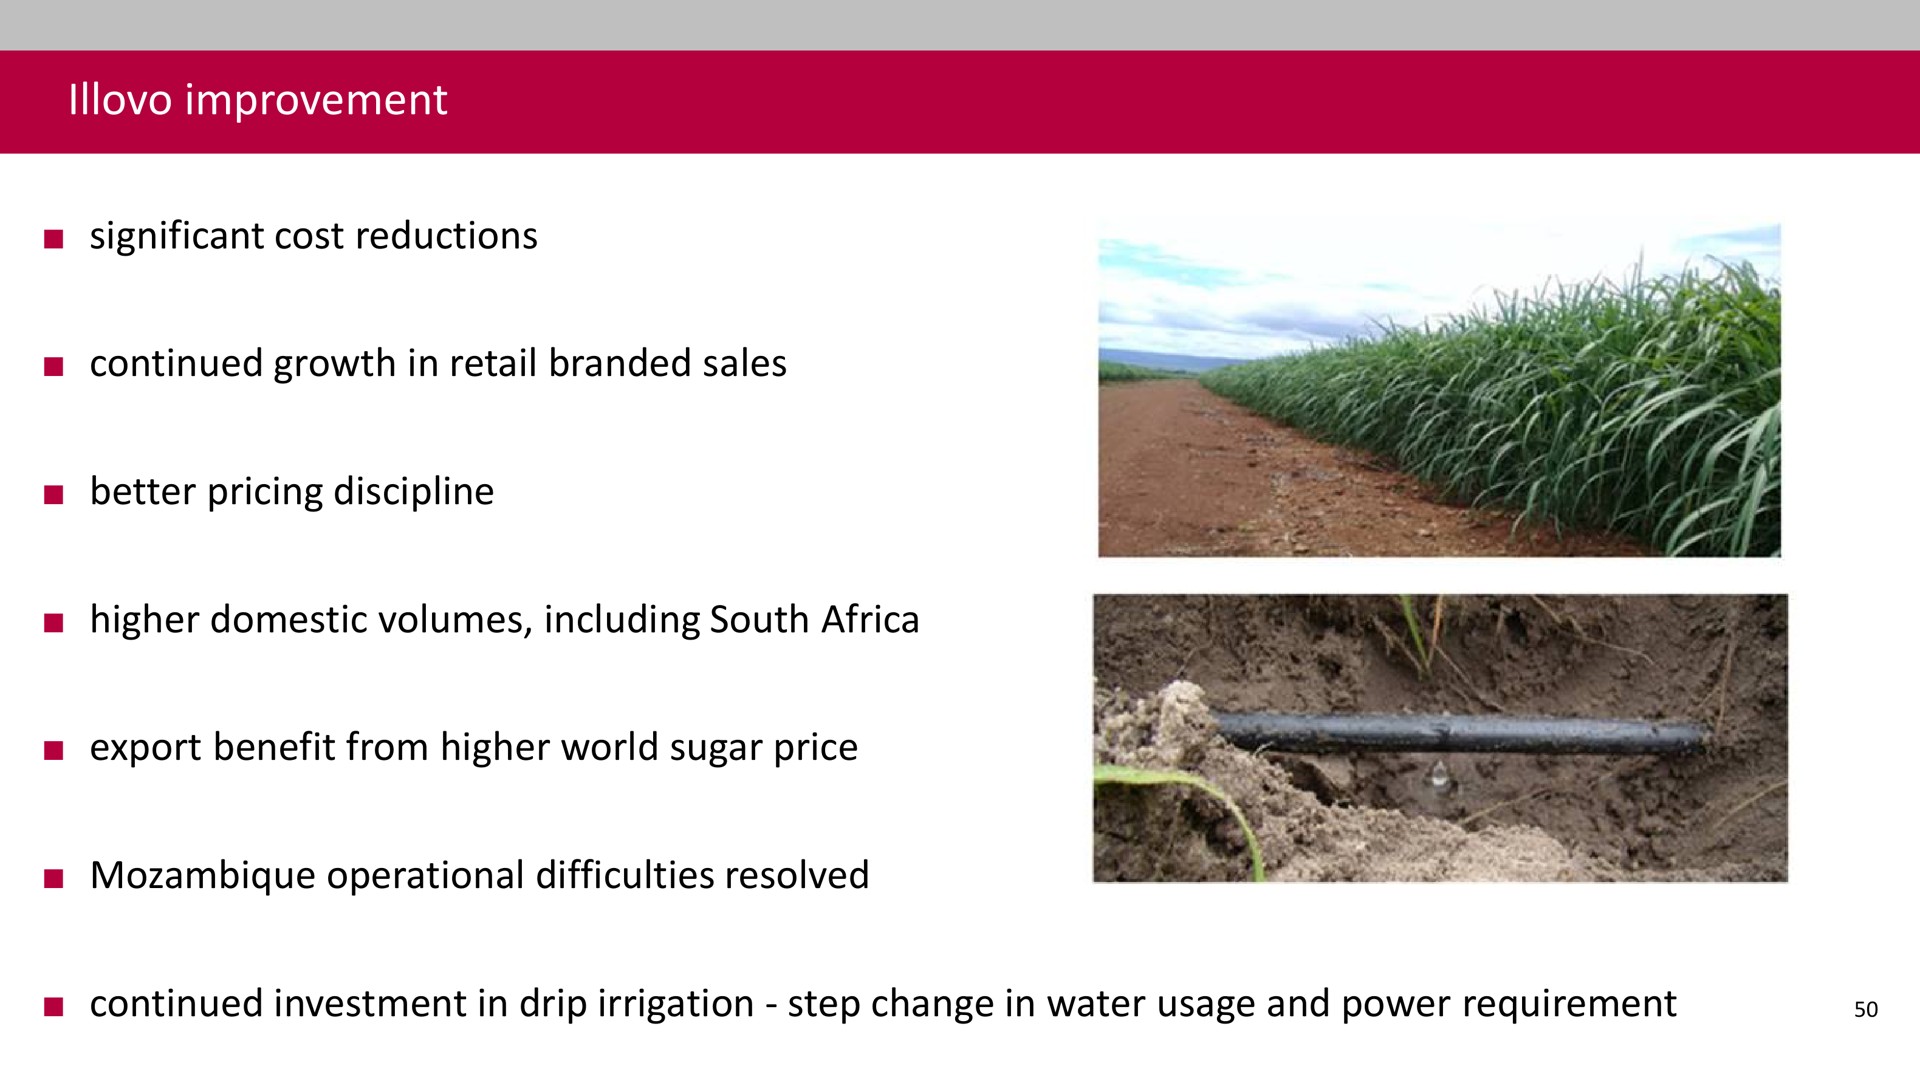 improvement significant cost reductions continued growth in retail branded sales better pricing discipline higher domestic volumes including south export benefit from higher world sugar price mozambique operational difficulties resolved continued investment in drip irrigation step change in water usage and power requirement | Associated British Foods